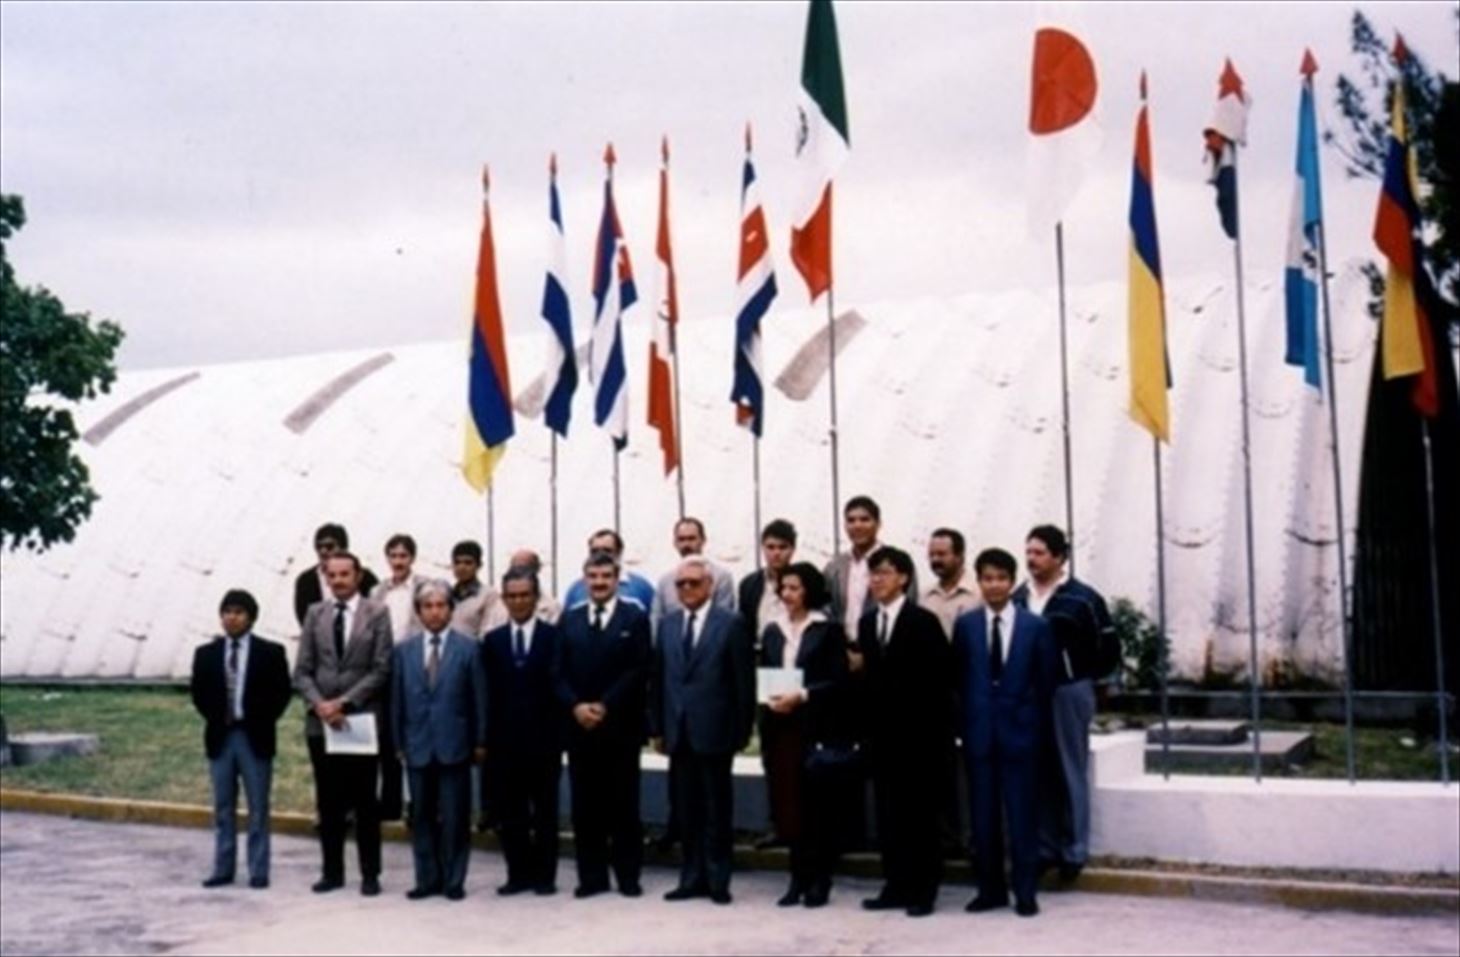 Photo 6: First third-country training course opening ceremony (September 1988)